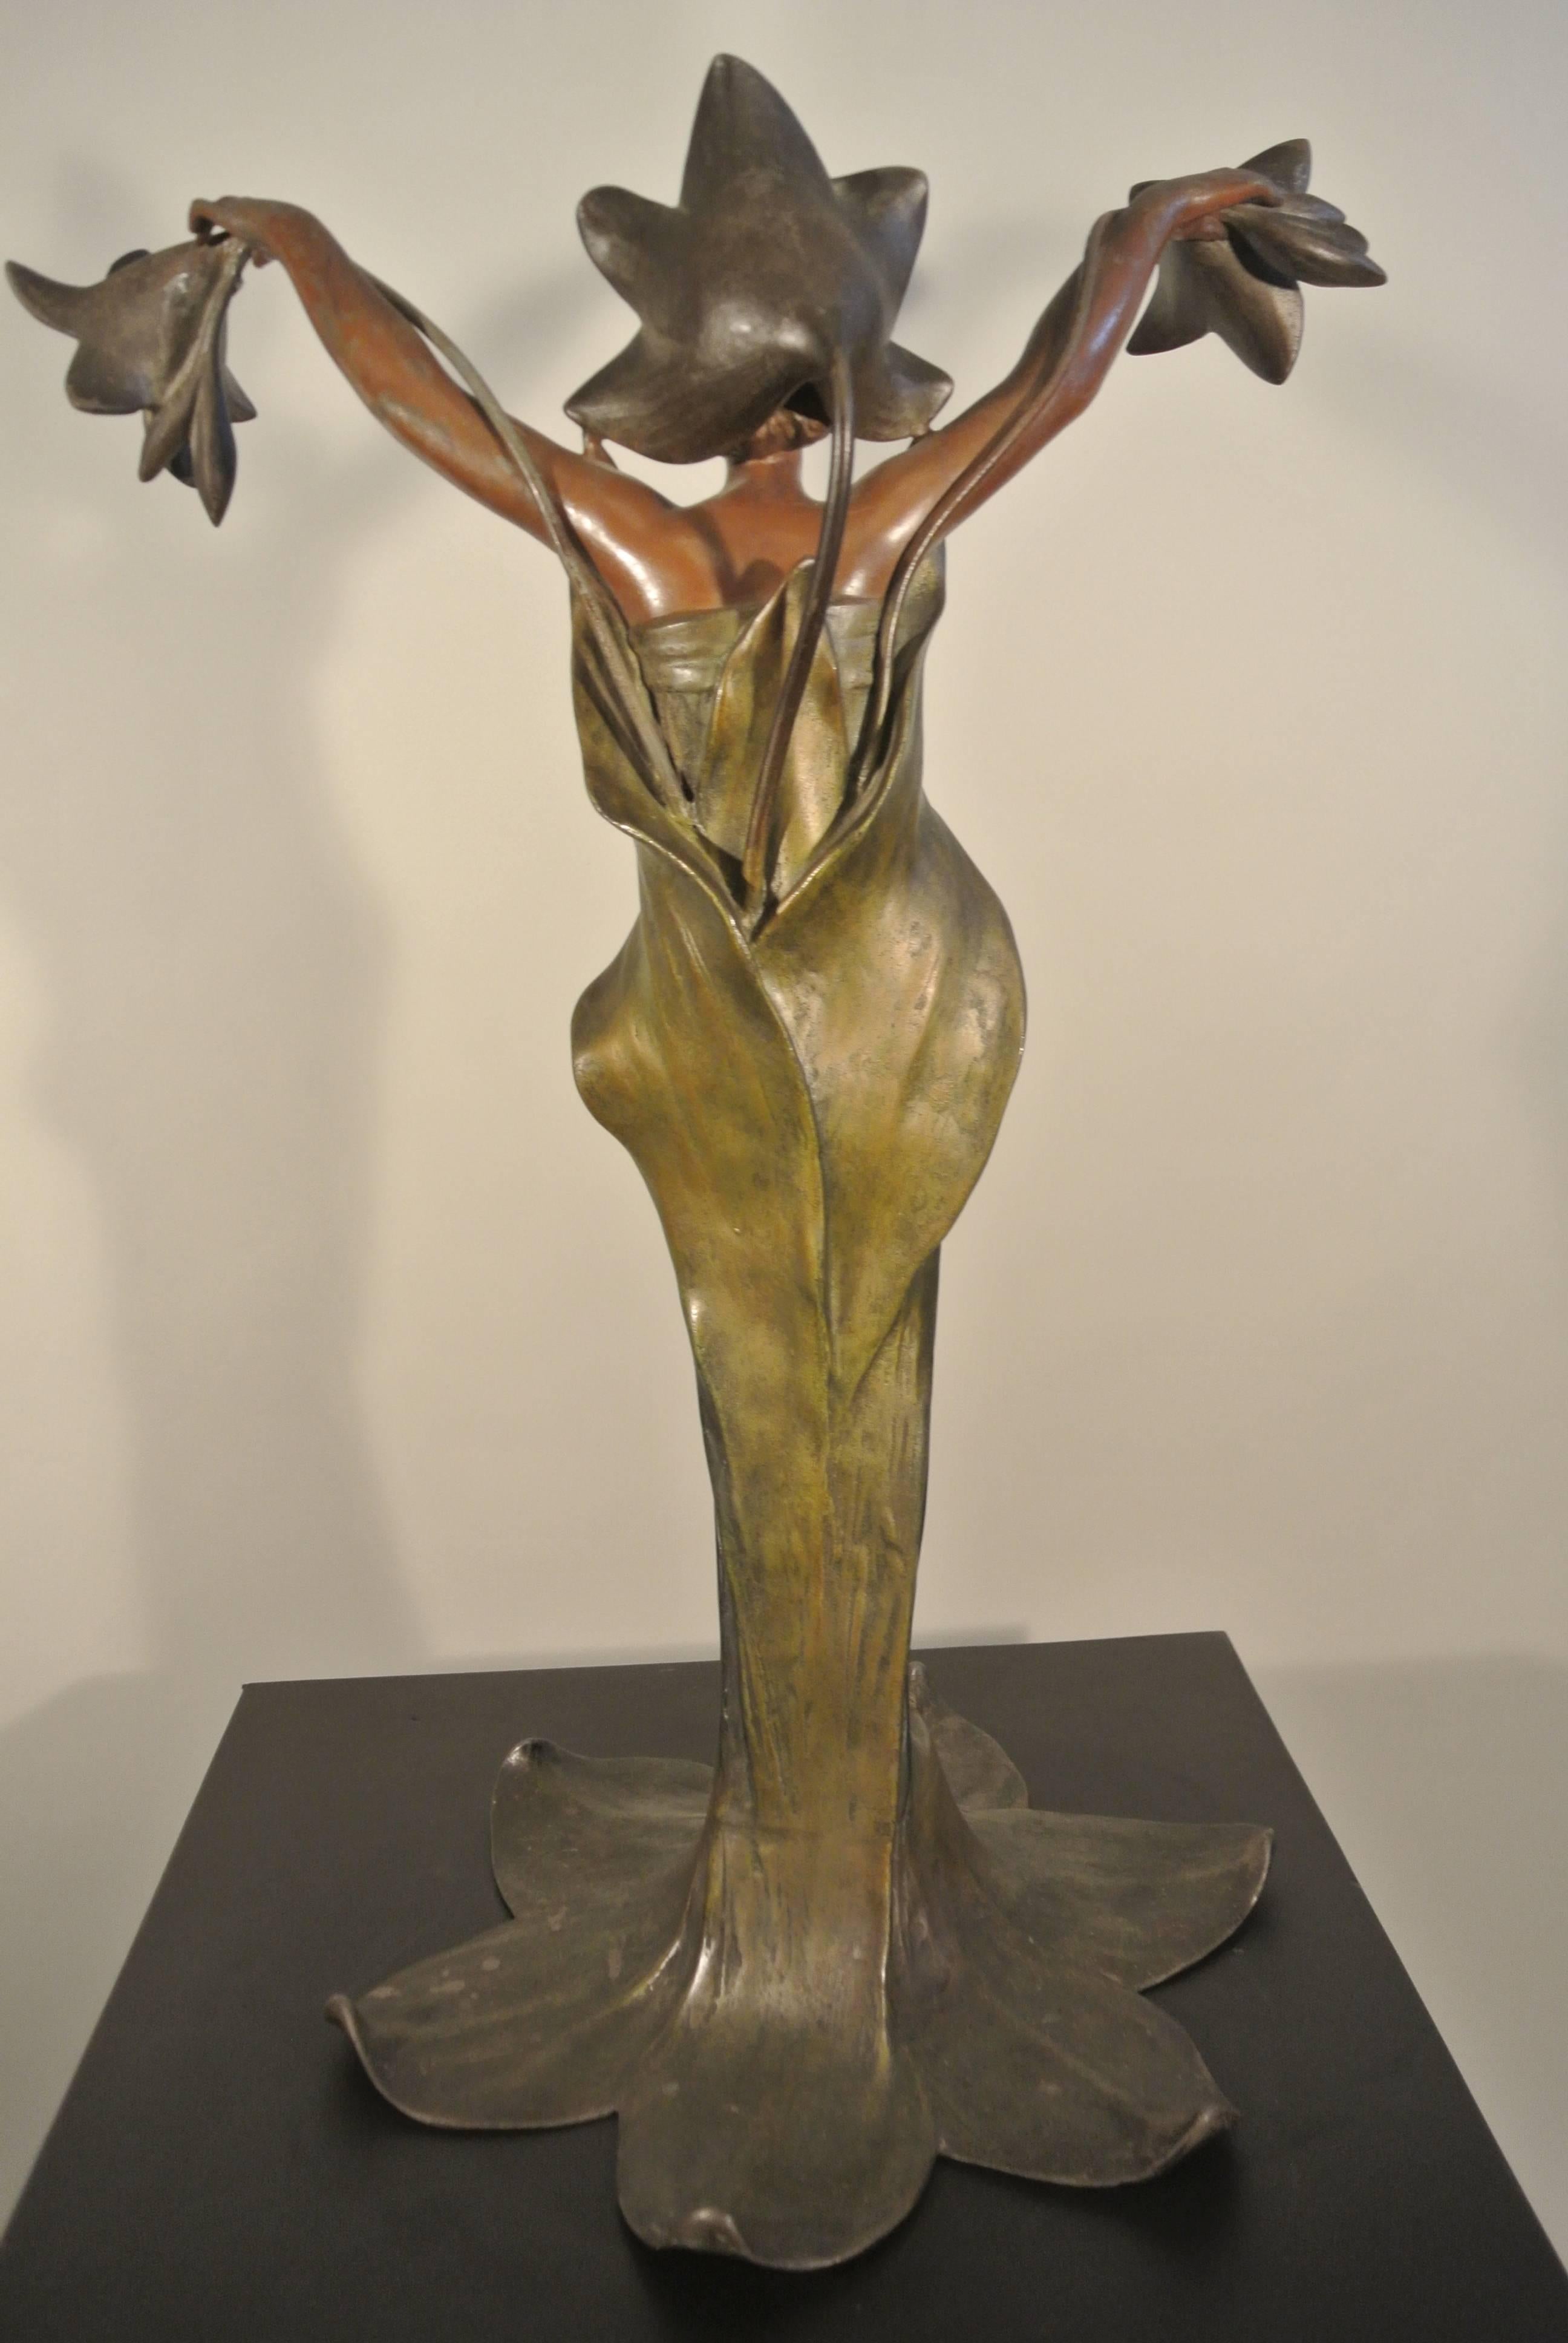 French In Cold Painted Metal, 'Lady of Lilies' Signed J. Causse, circa 1900